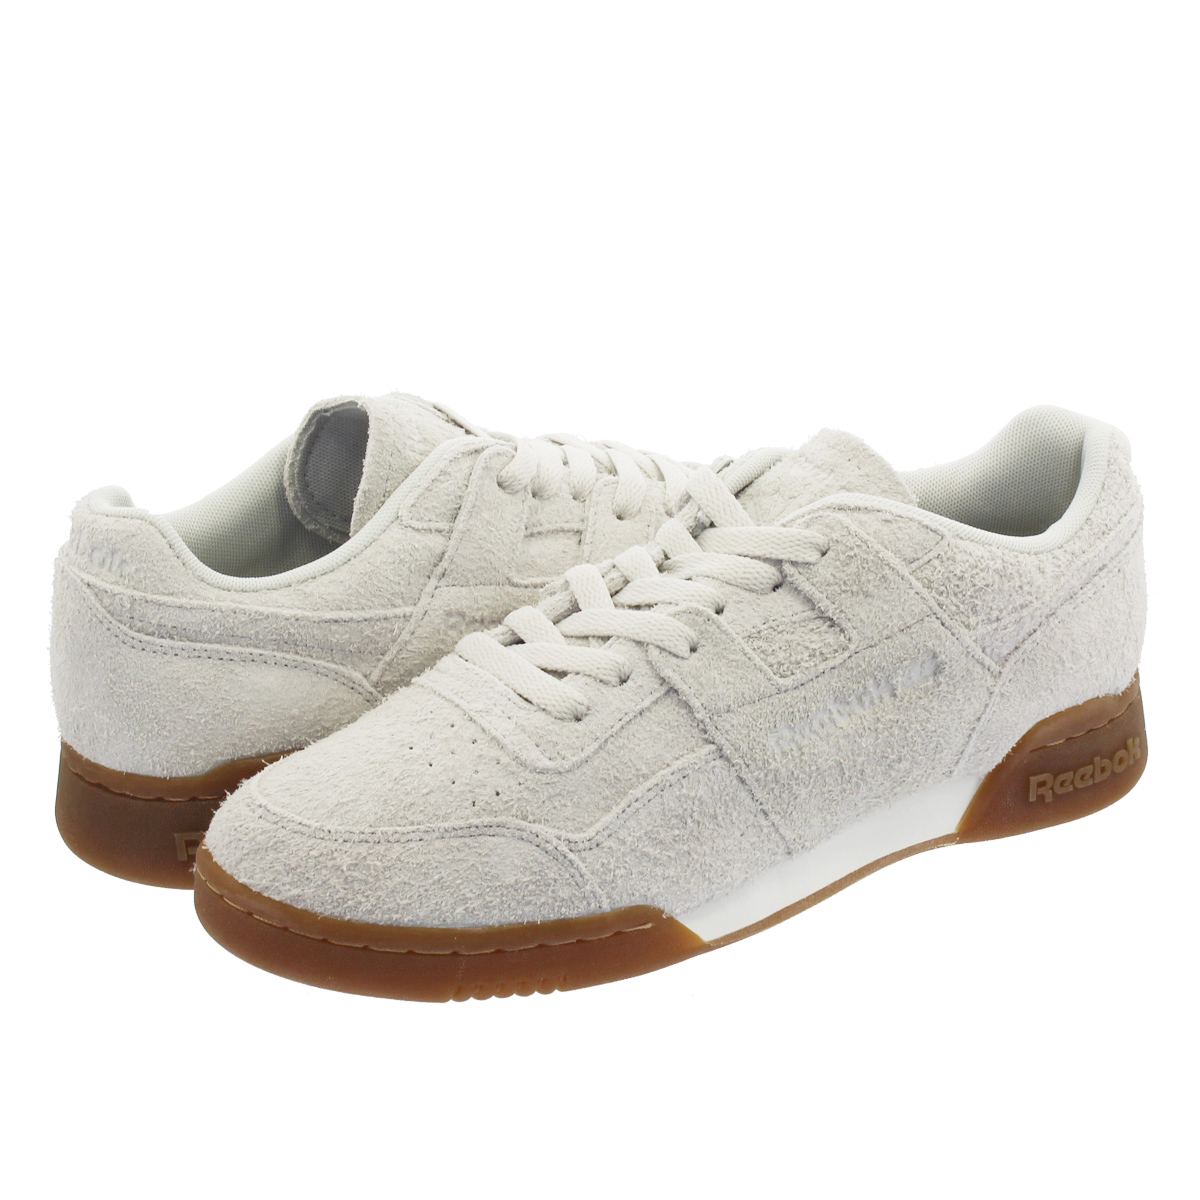 Suede Reebok Workouts Online Shopping For Women Men Kids Fashion Lifestyle Free Delivery Returns